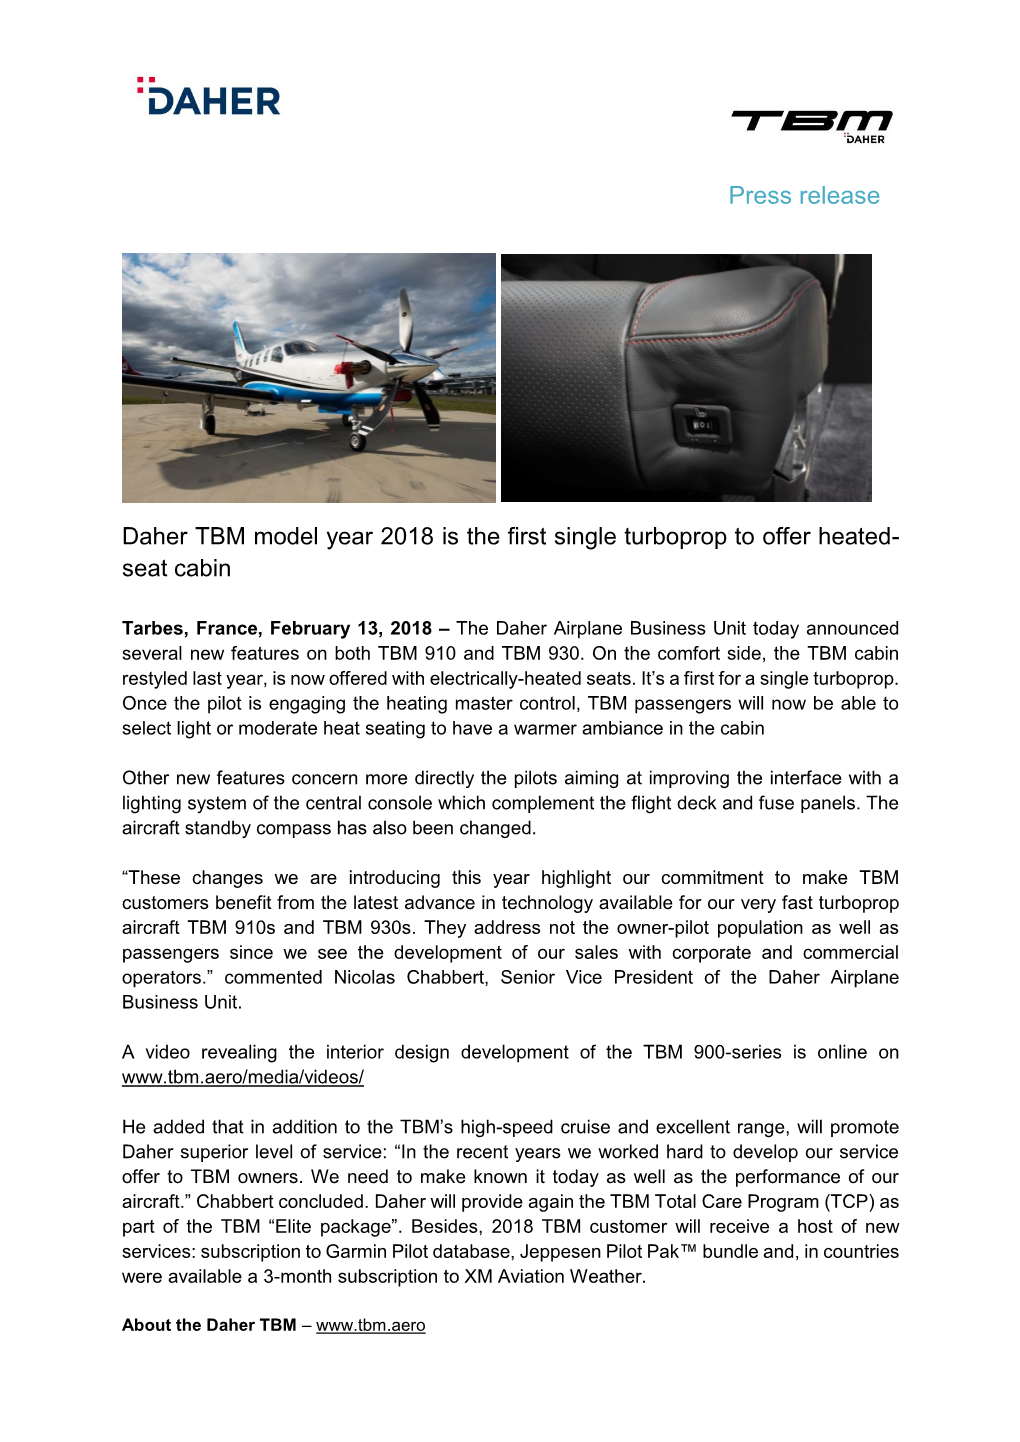 Press Release Daher TBM Model Year 2018 Is the First Single Turboprop To